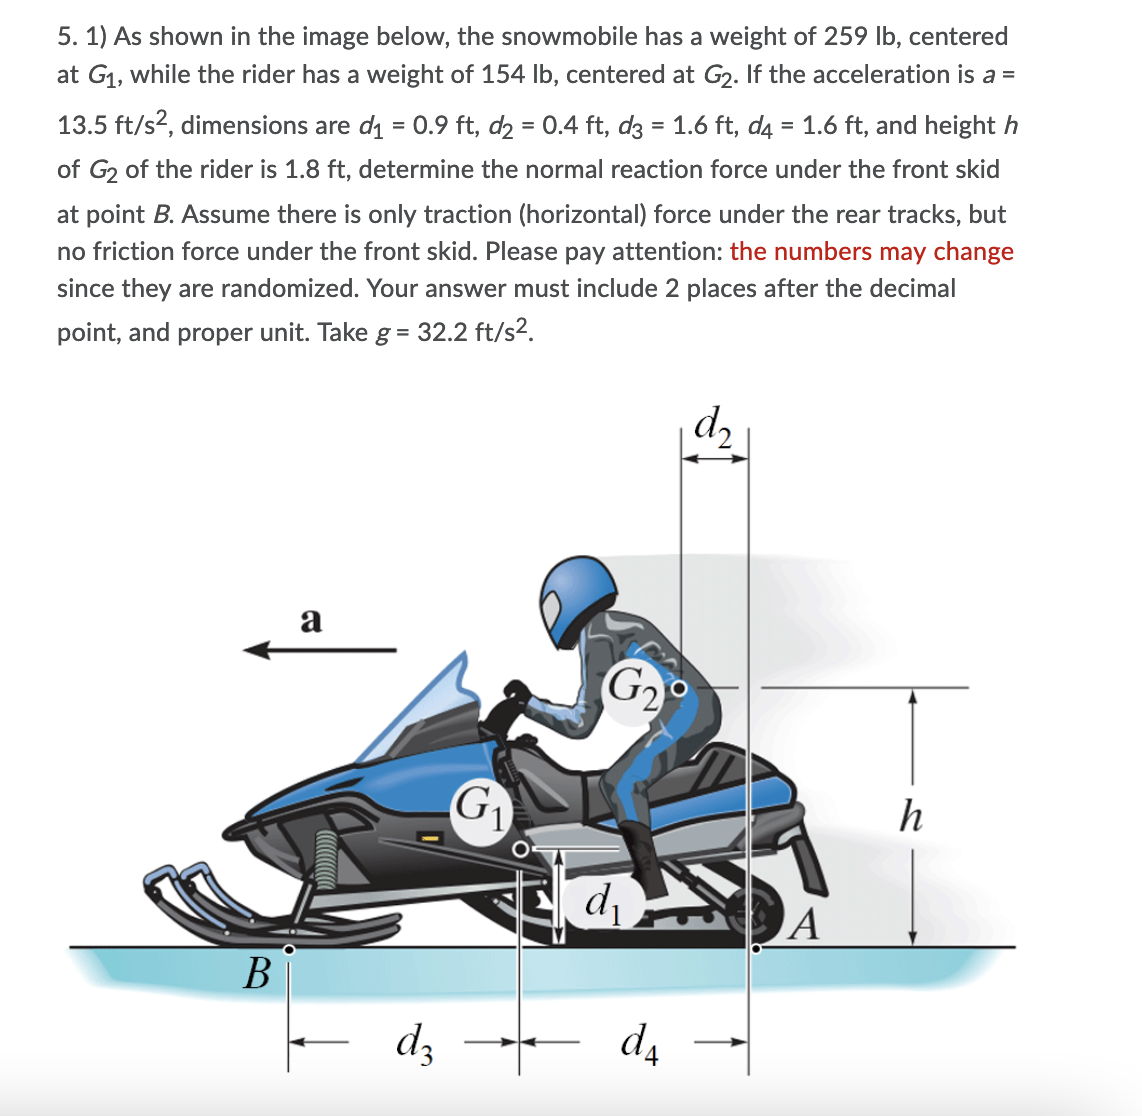 5. 1) As shown in the image below, the snowmobile has a weight of 259 lb, centered
at G1, while the rider has a weight of 154 Ib, centered at G2. If the acceleration is a =
13.5 ft/s?, dimensions are di = 0.9 ft, d2 = 0.4 ft, d3 = 1.6 ft, d4 = 1.6 ft, and height h
of G2 of the rider is 1.8 ft, determine the normal reaction force under the front skid
at point B. Assume there is only traction (horizontal) force under the rear tracks, but
no friction force under the front skid. Please pay attention: the numbers may change
since they are randomized. Your answer must include 2 places after the decimal
point, and proper unit. Take g= 32.2 ft/s2.
a
G2
G1
h
A
В
dz da
-
